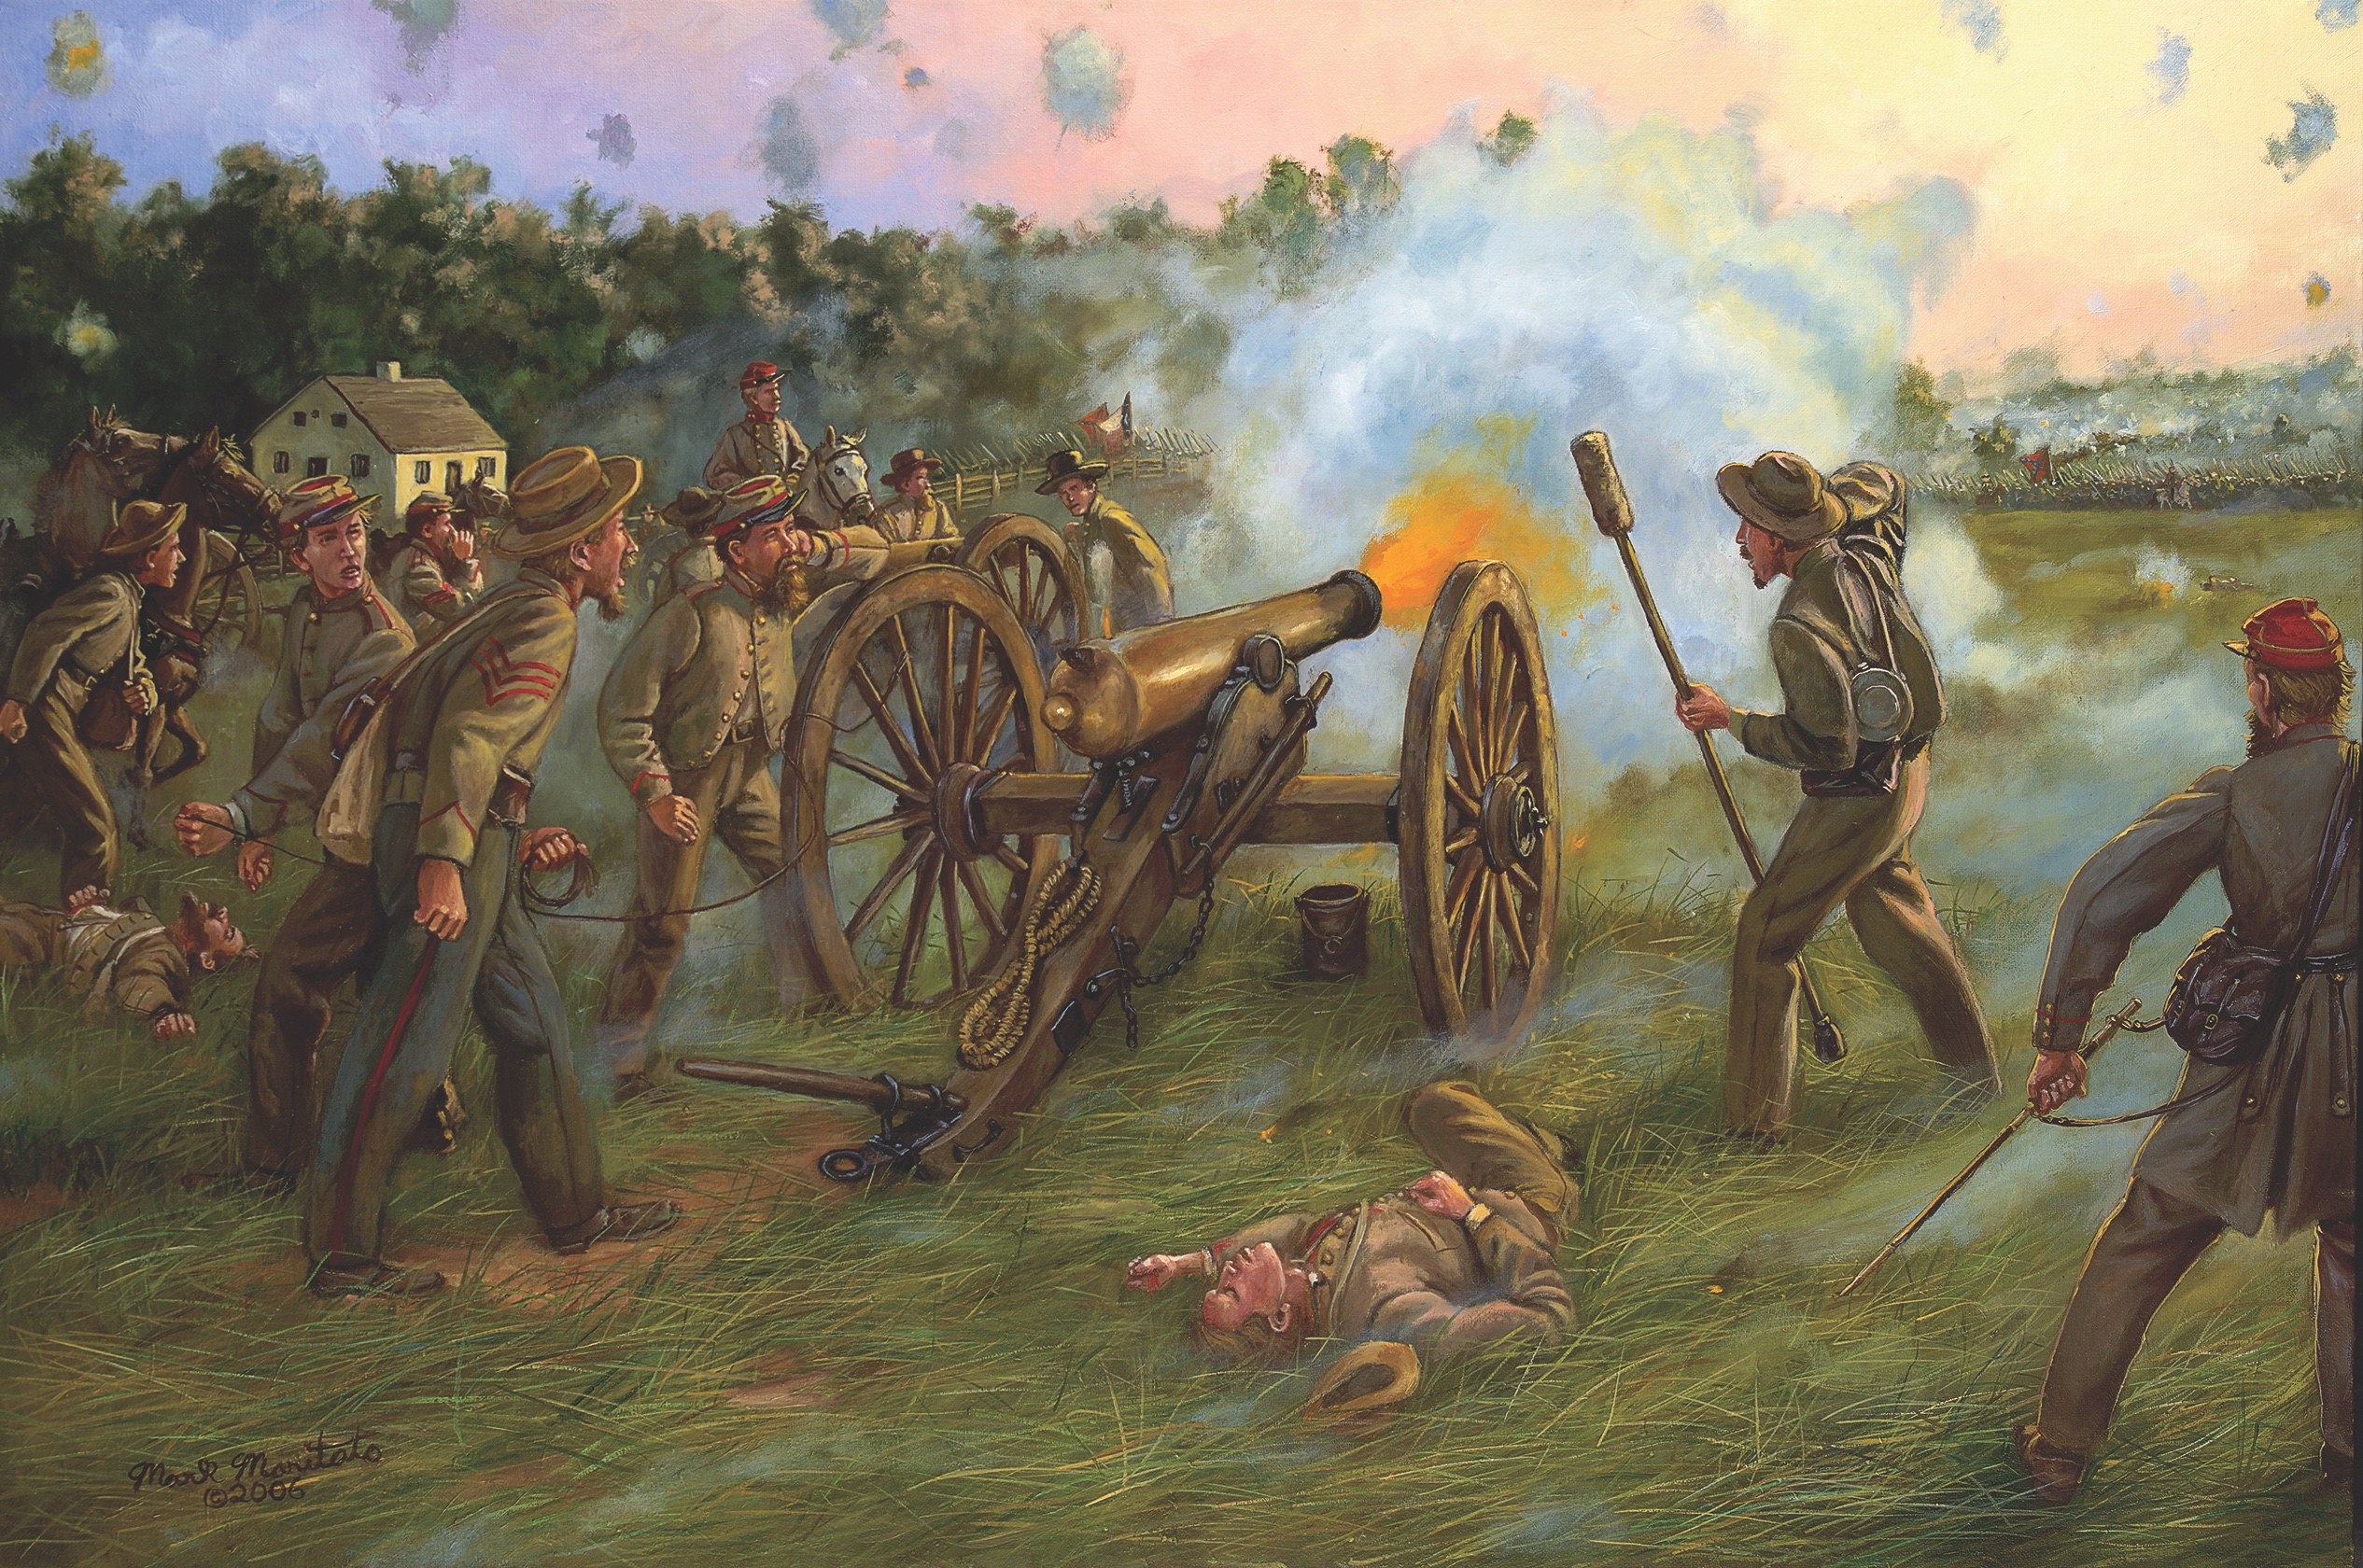 Posted near the Dunker Church at Antietam, gunners in Colonel Stephen D. Lee’s Battalion, which included both Moody’s and Woolfolk’s batteries, unload on approaching Federals. (Mark Maritato/Bridgeman Images)